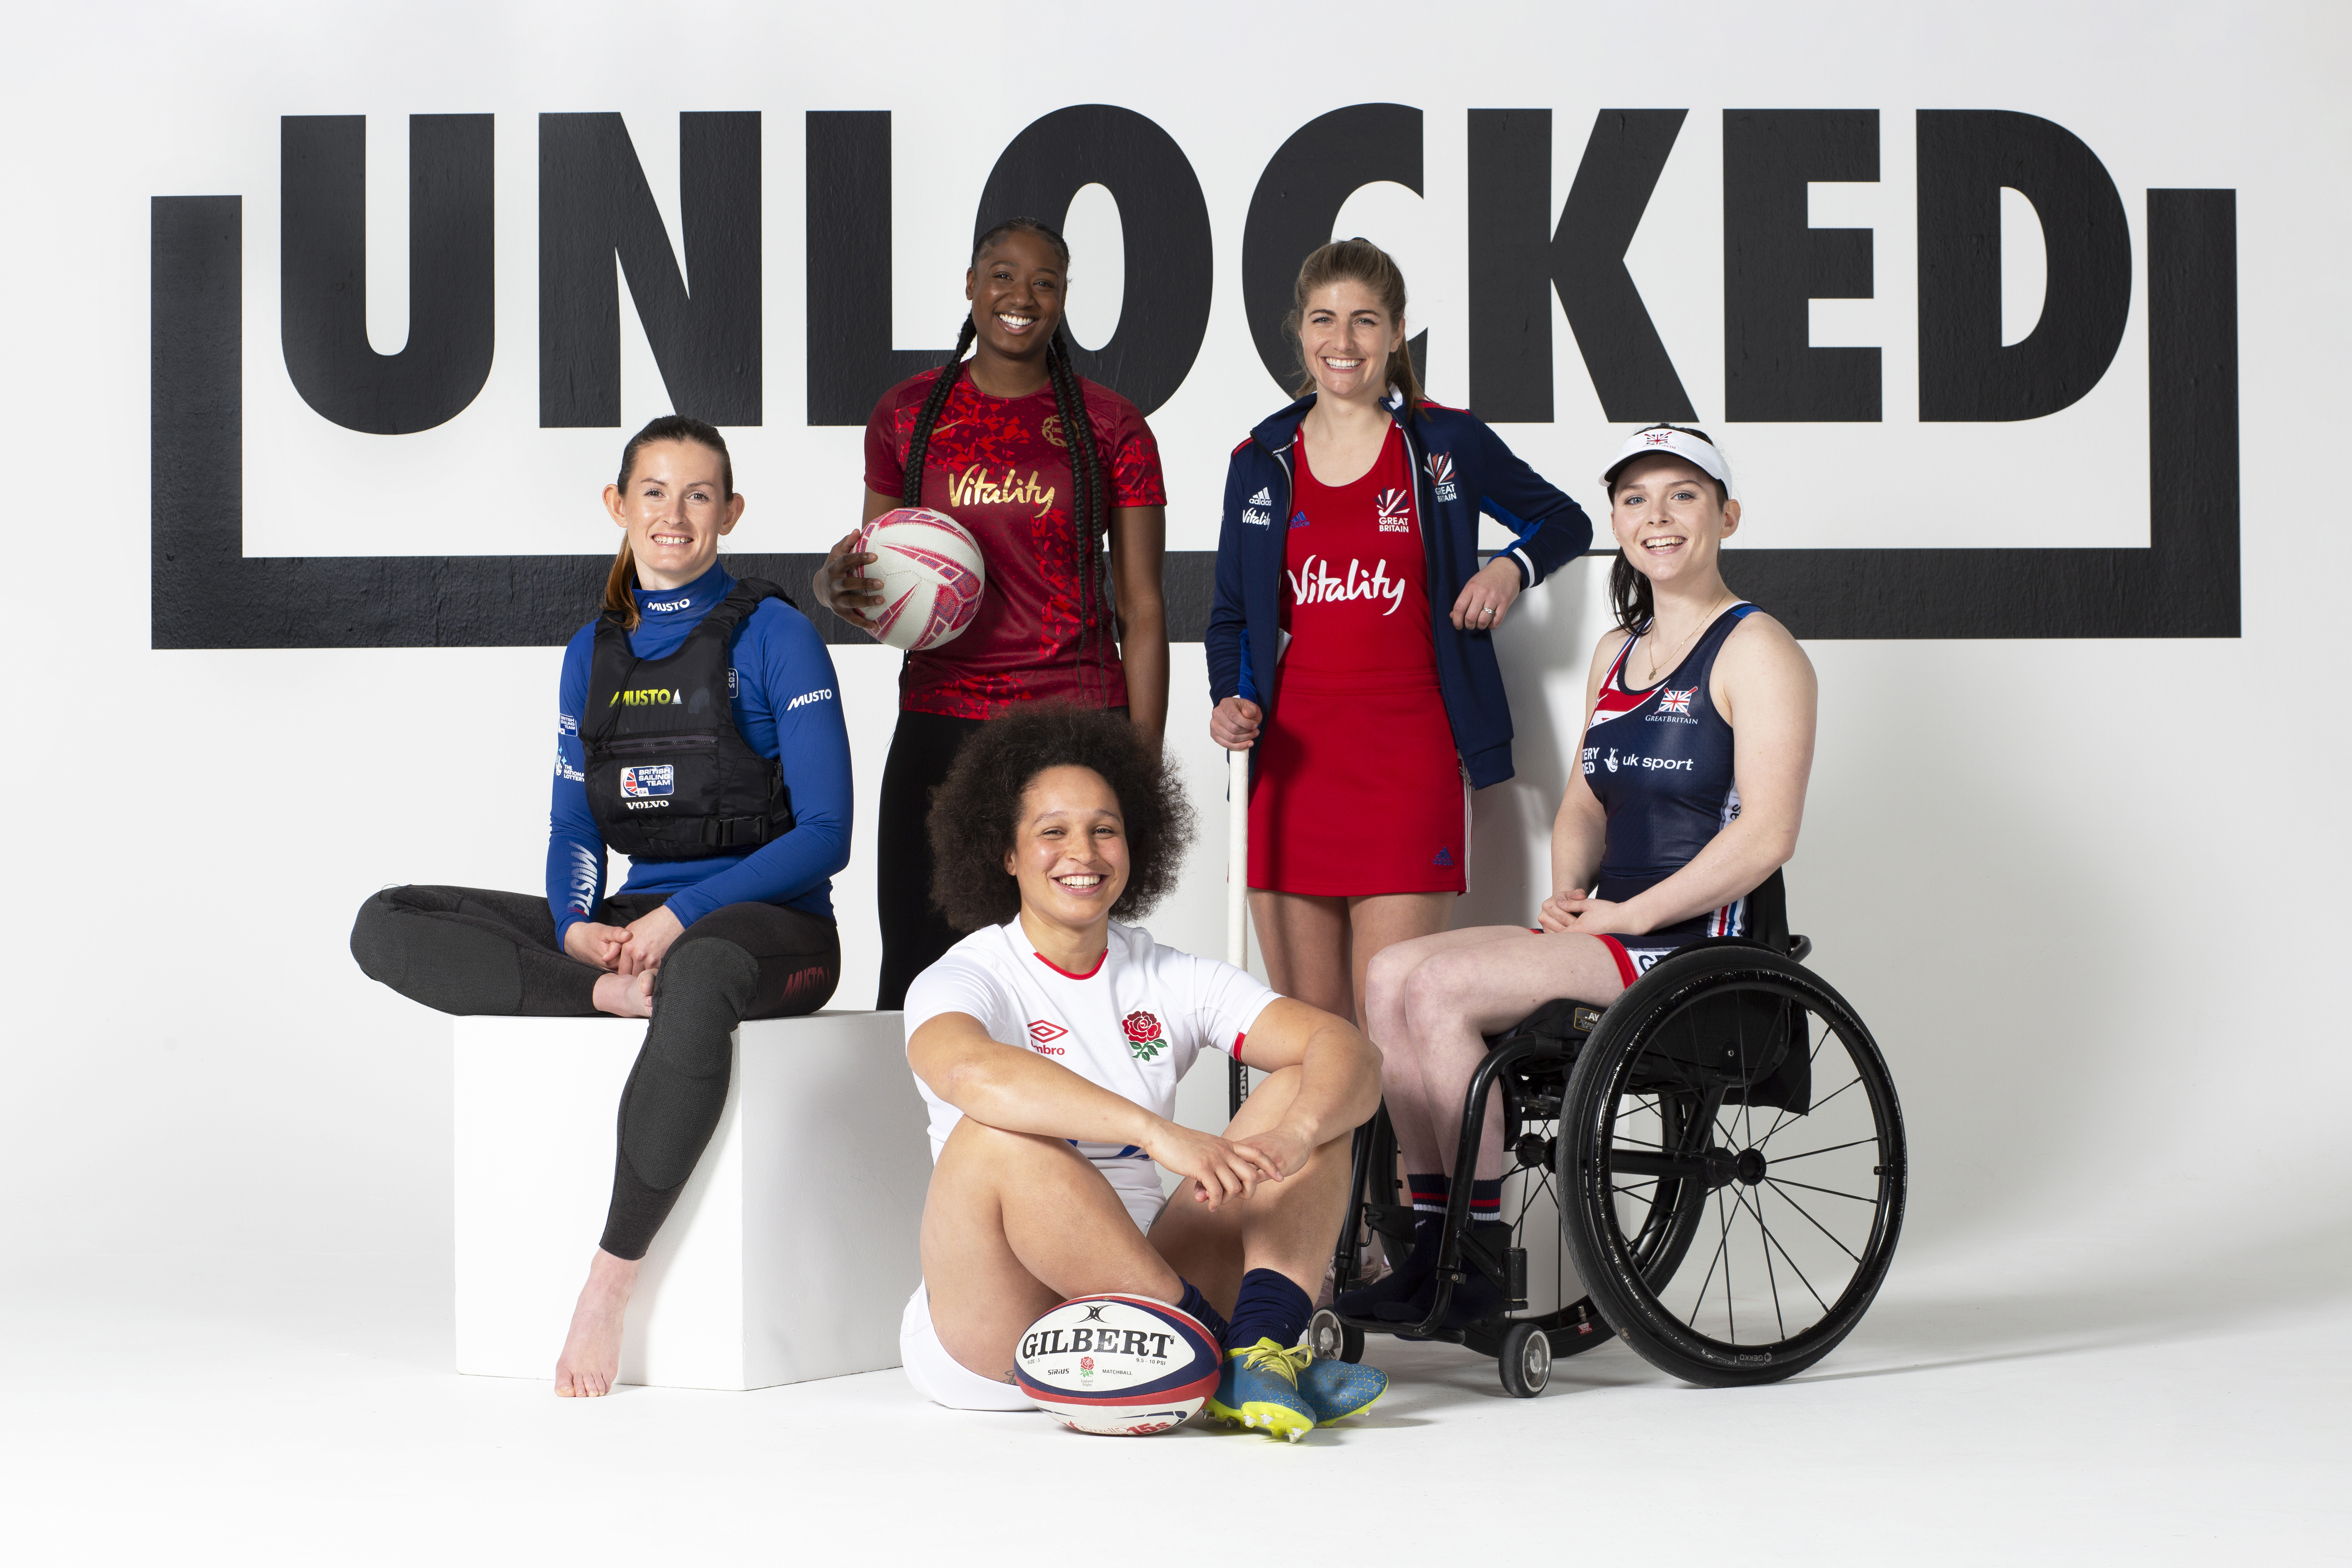 LEADING FEMALE ATHLETES, FROM 27 SPORTS, UNITE TO UNLOCK THE FUTURE OF WOMEN’S SPORT